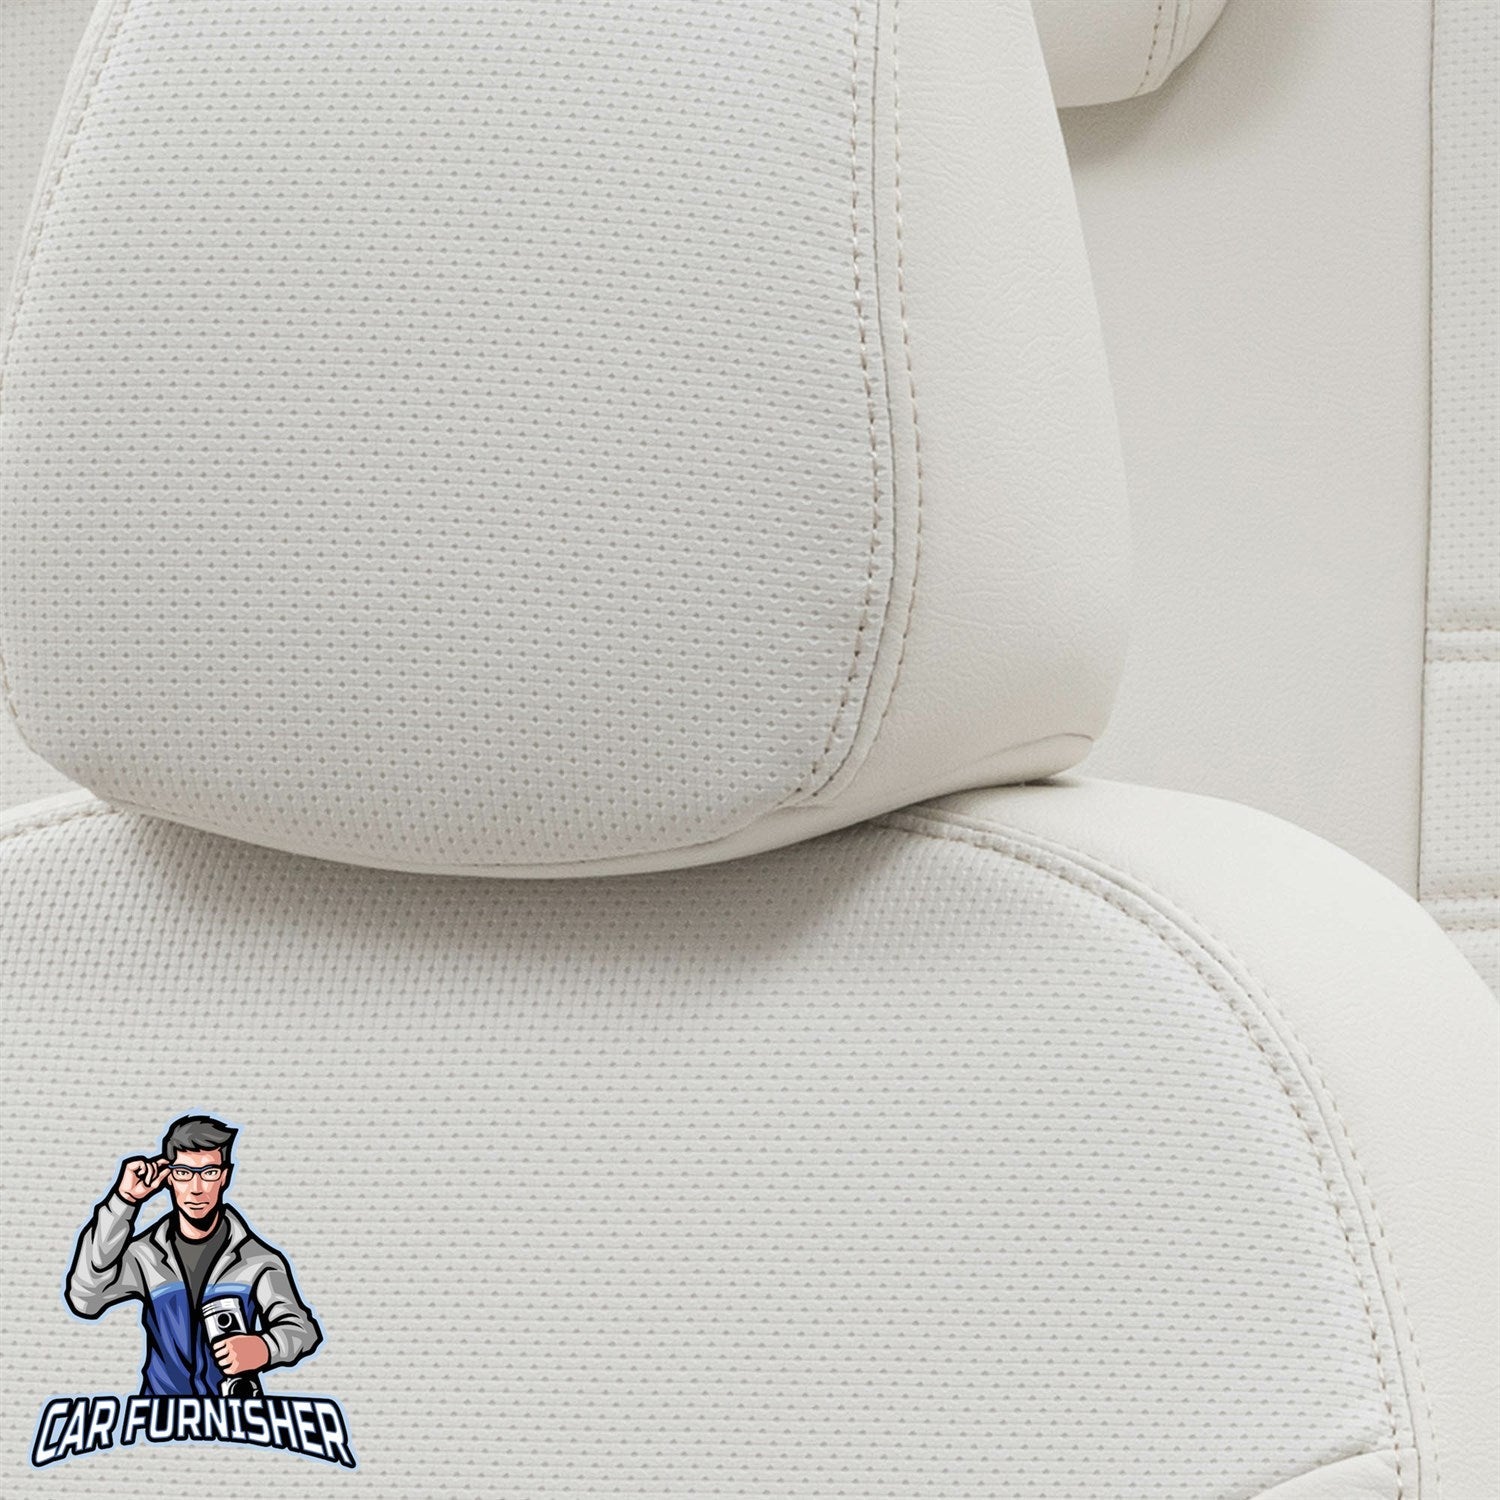 Mercedes S Class Seat Covers New York Leather Design Ivory Leather